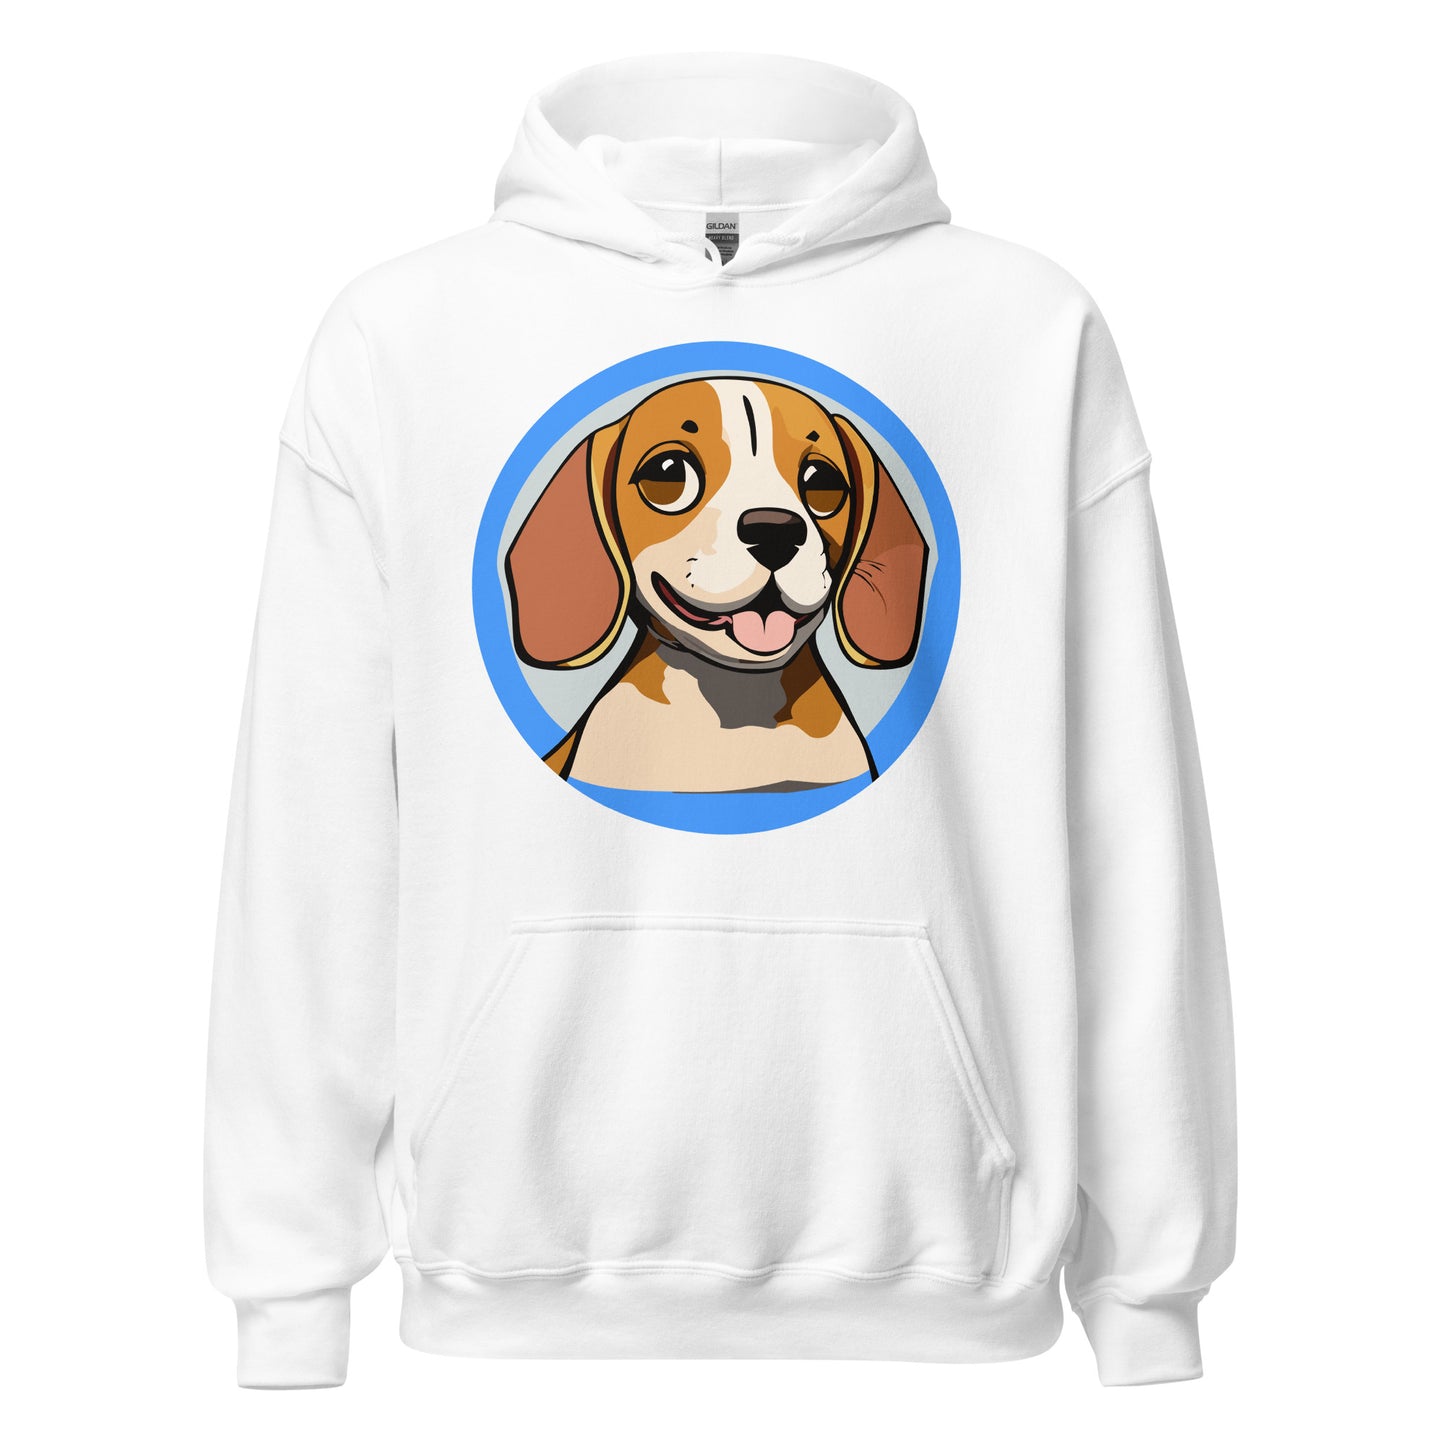 Comfy unisex hoodie for him or her with a cute beagle image, in white